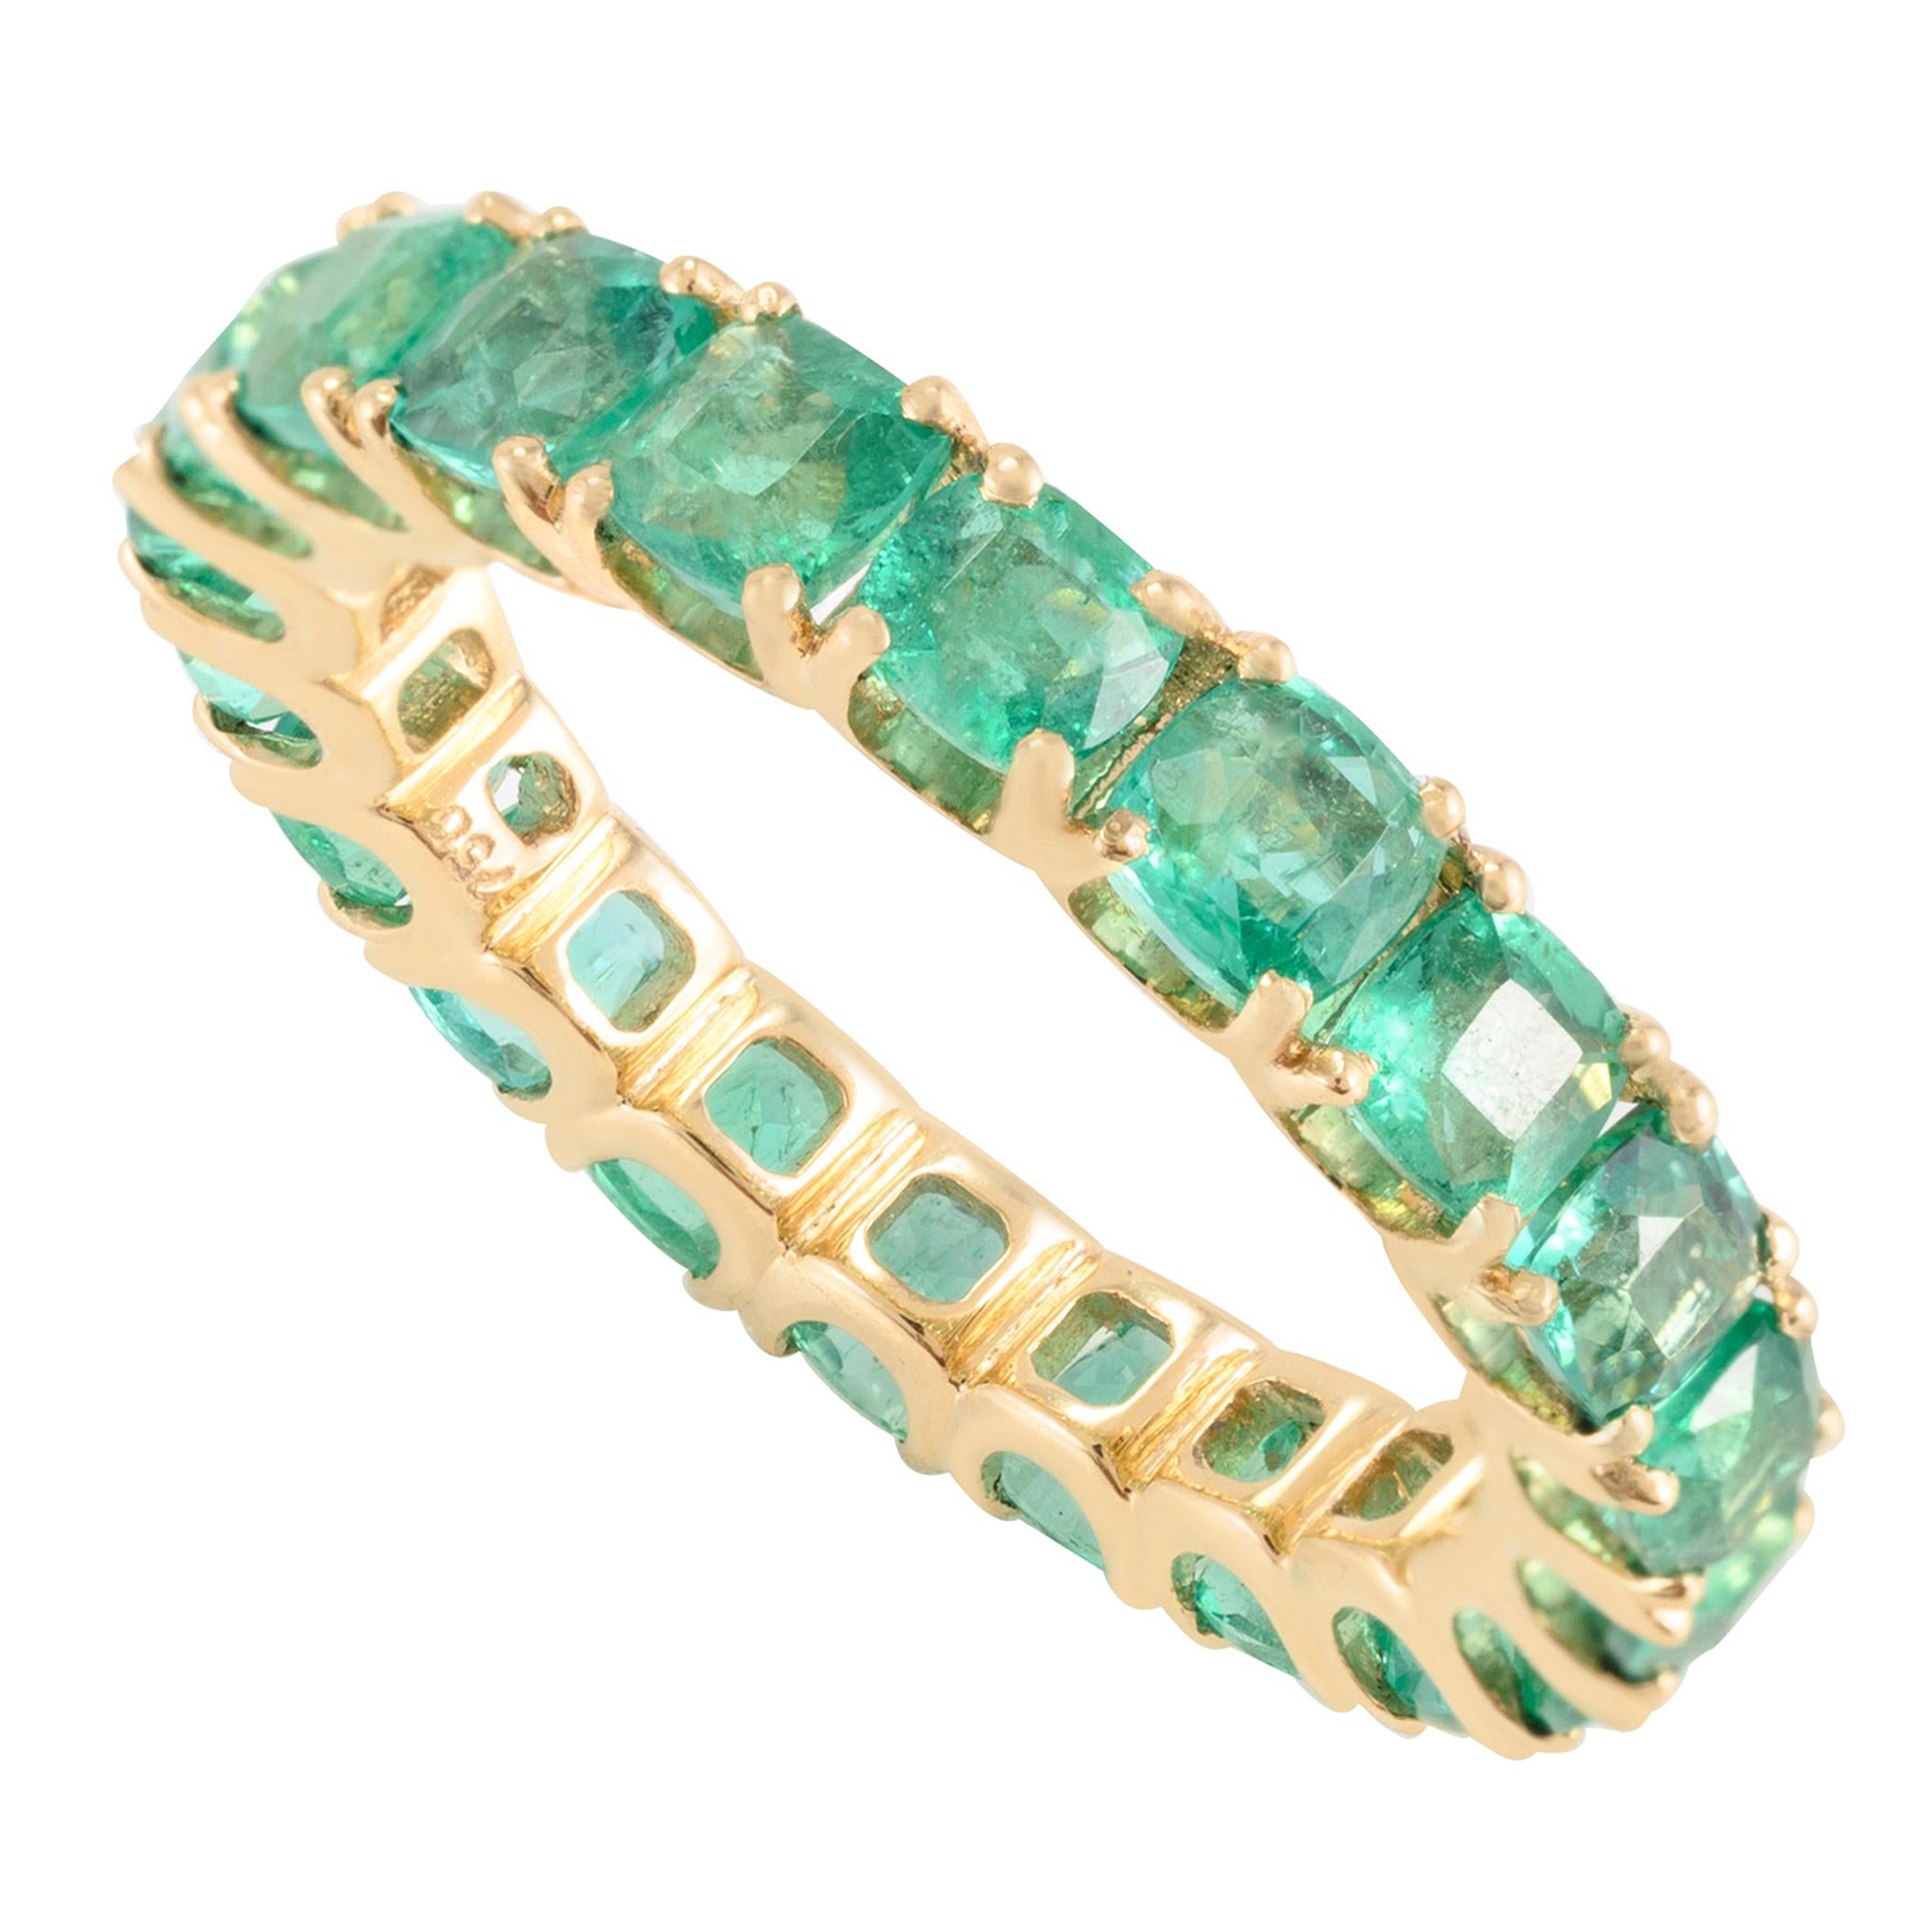 For Sale:  18k Solid Yellow Gold 4.06 CTW Cushion Emerald Eternity Band Ring